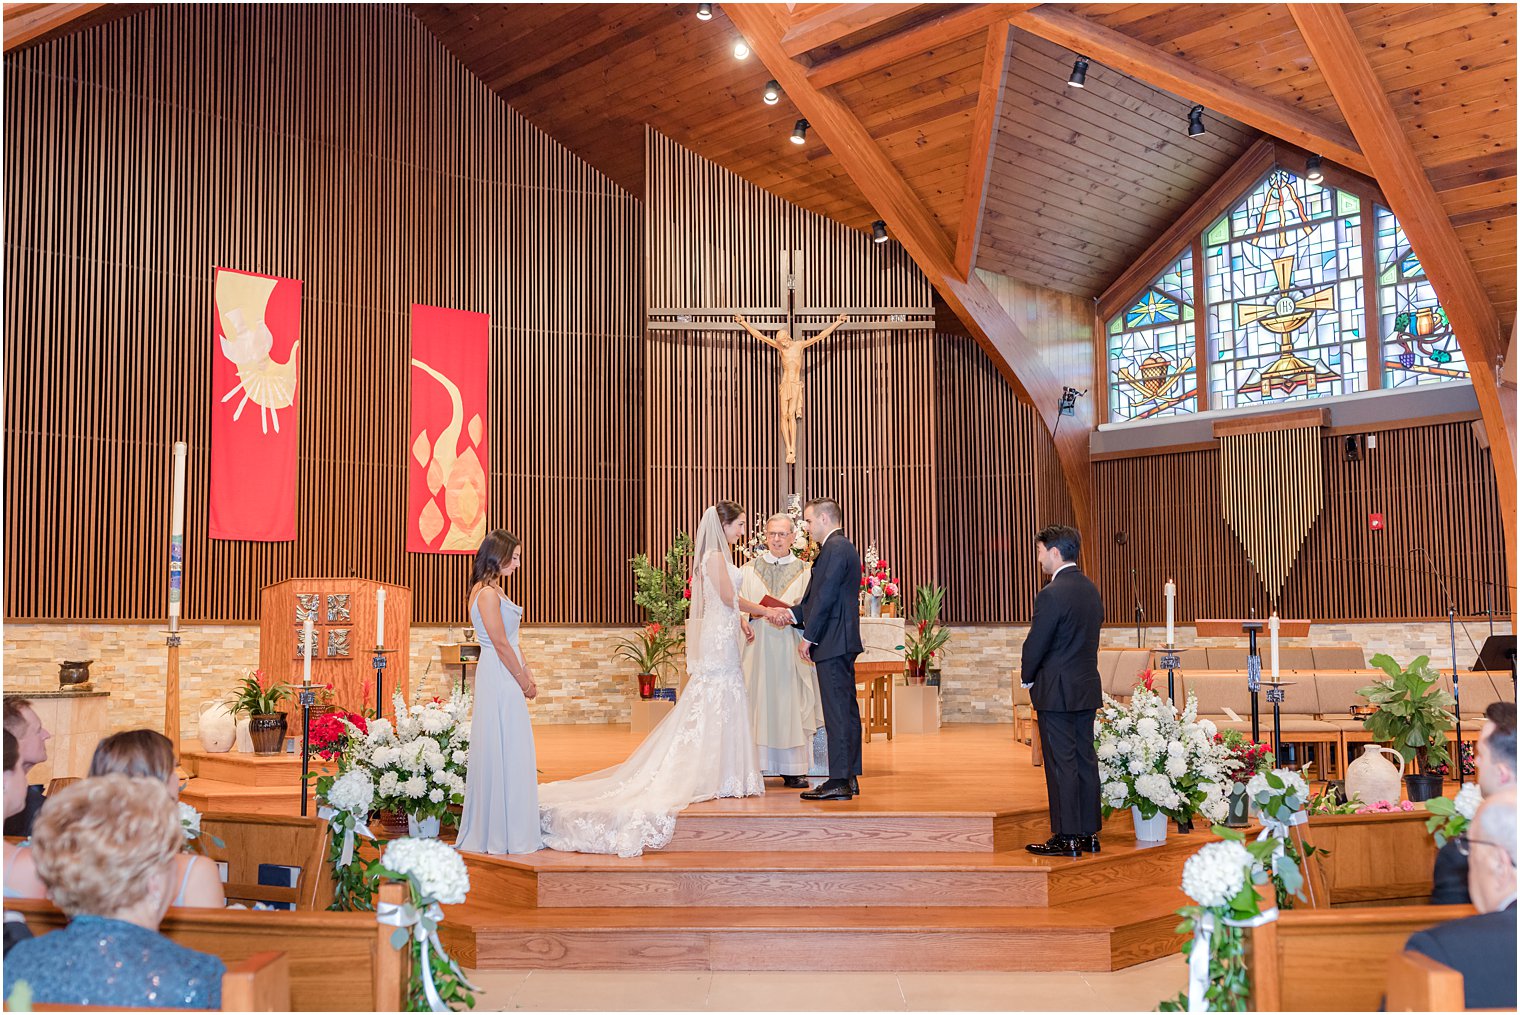 newlyweds exchange vows during traditional church wedding ceremony in New Jersey